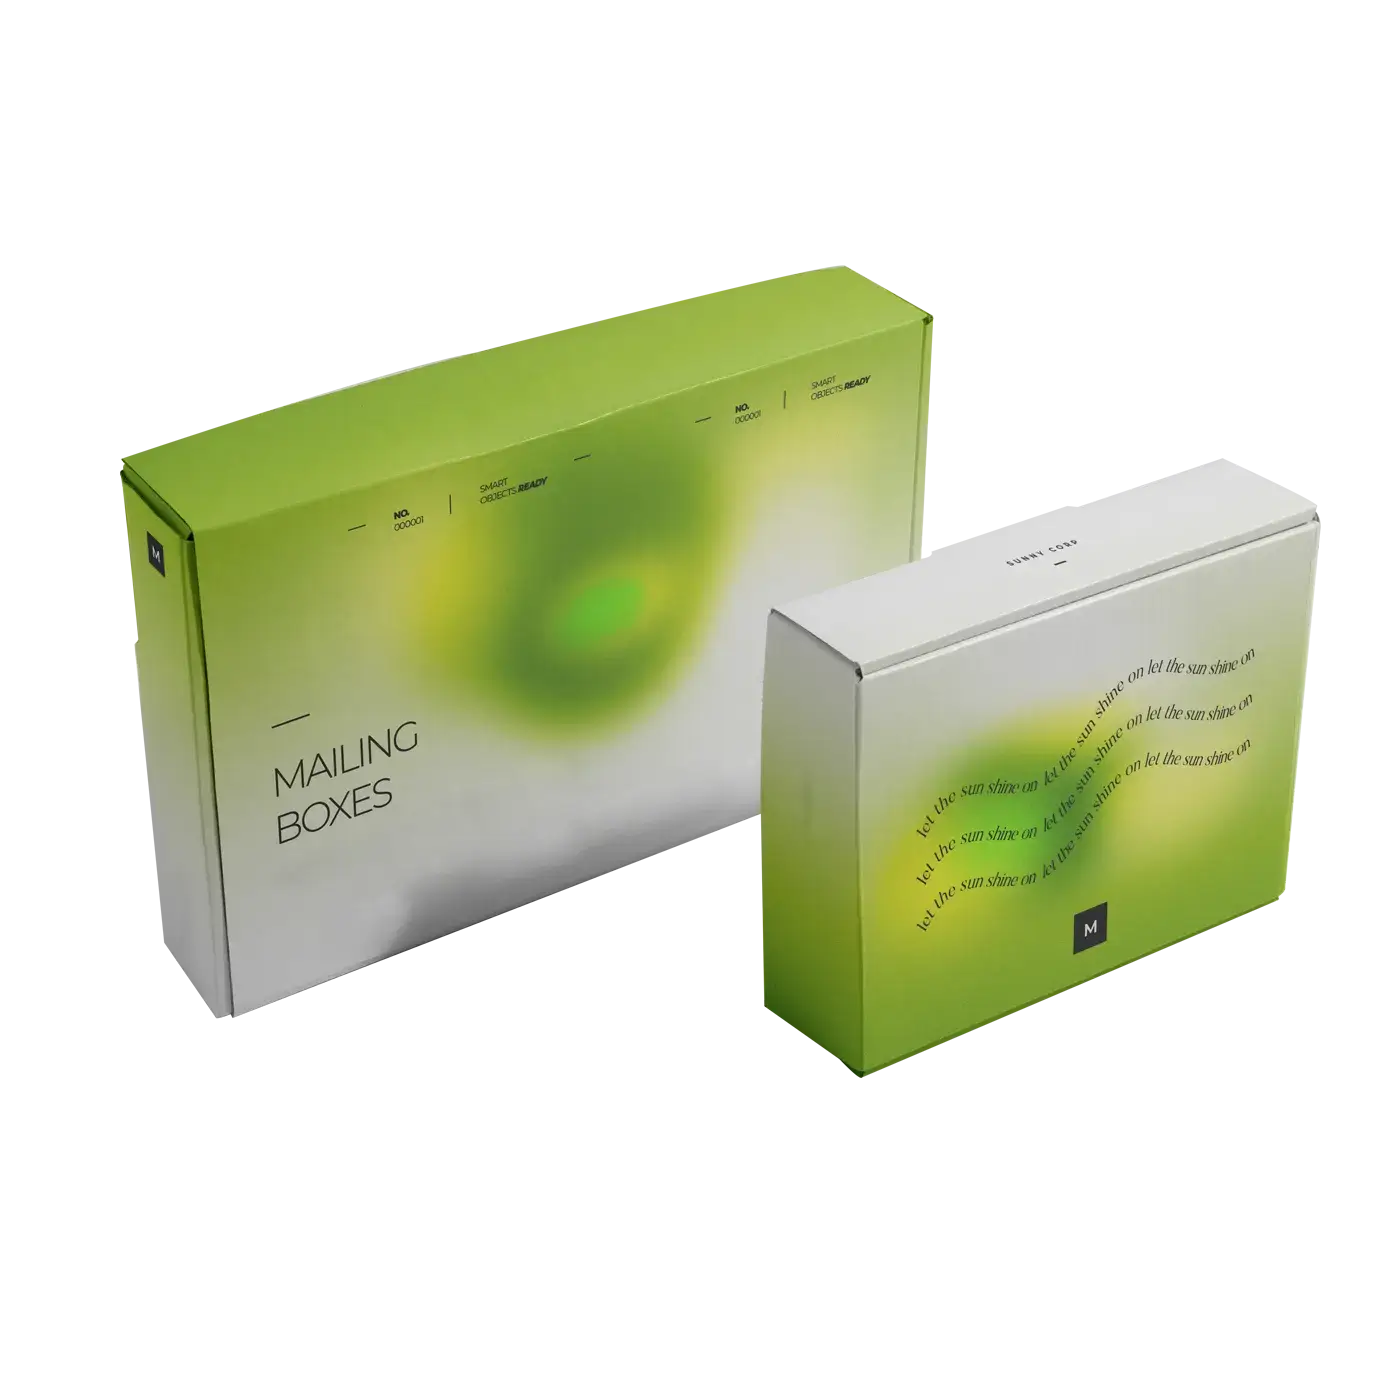 Custom CBD Mailer Box Green White Gradient Color Background Black Printed Text Mailing Boxes by qualitycustomboxes.com